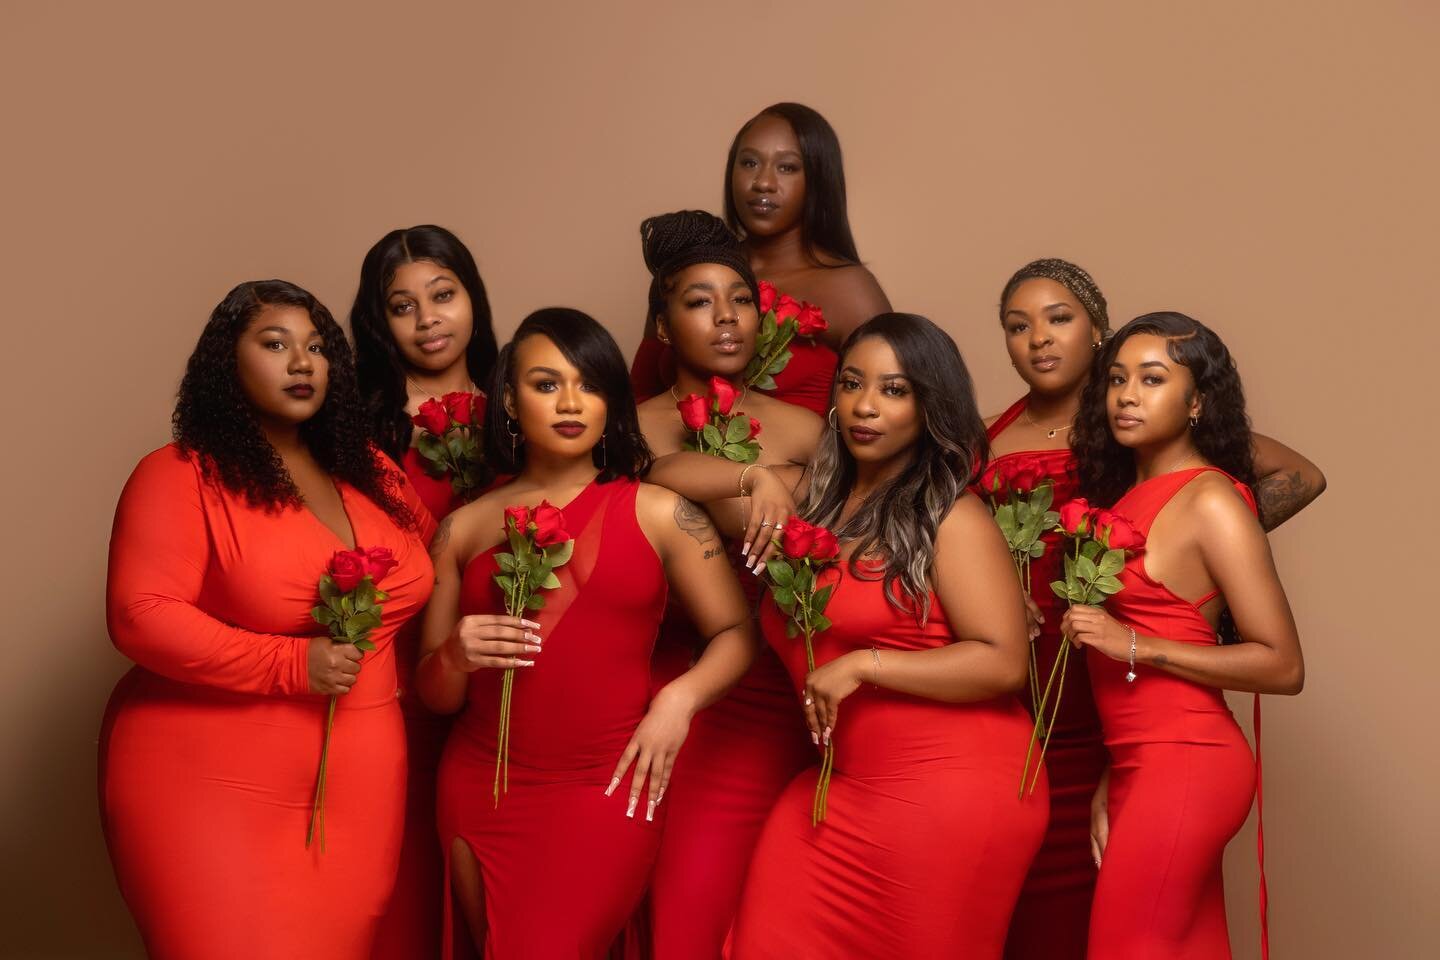 Happy Founders Day to the ladies of Delta Sigma Theta 🌹🐘❤️

Shot at @soba.studios 
By: @sobapictures 

#StudioPhotography
#PortraitPhotography
#PhotographyStudio
#StudioShoot
#StudioSession
#PhotographyLife
#PhotographyTips
#BehindTheScenes
#Photog